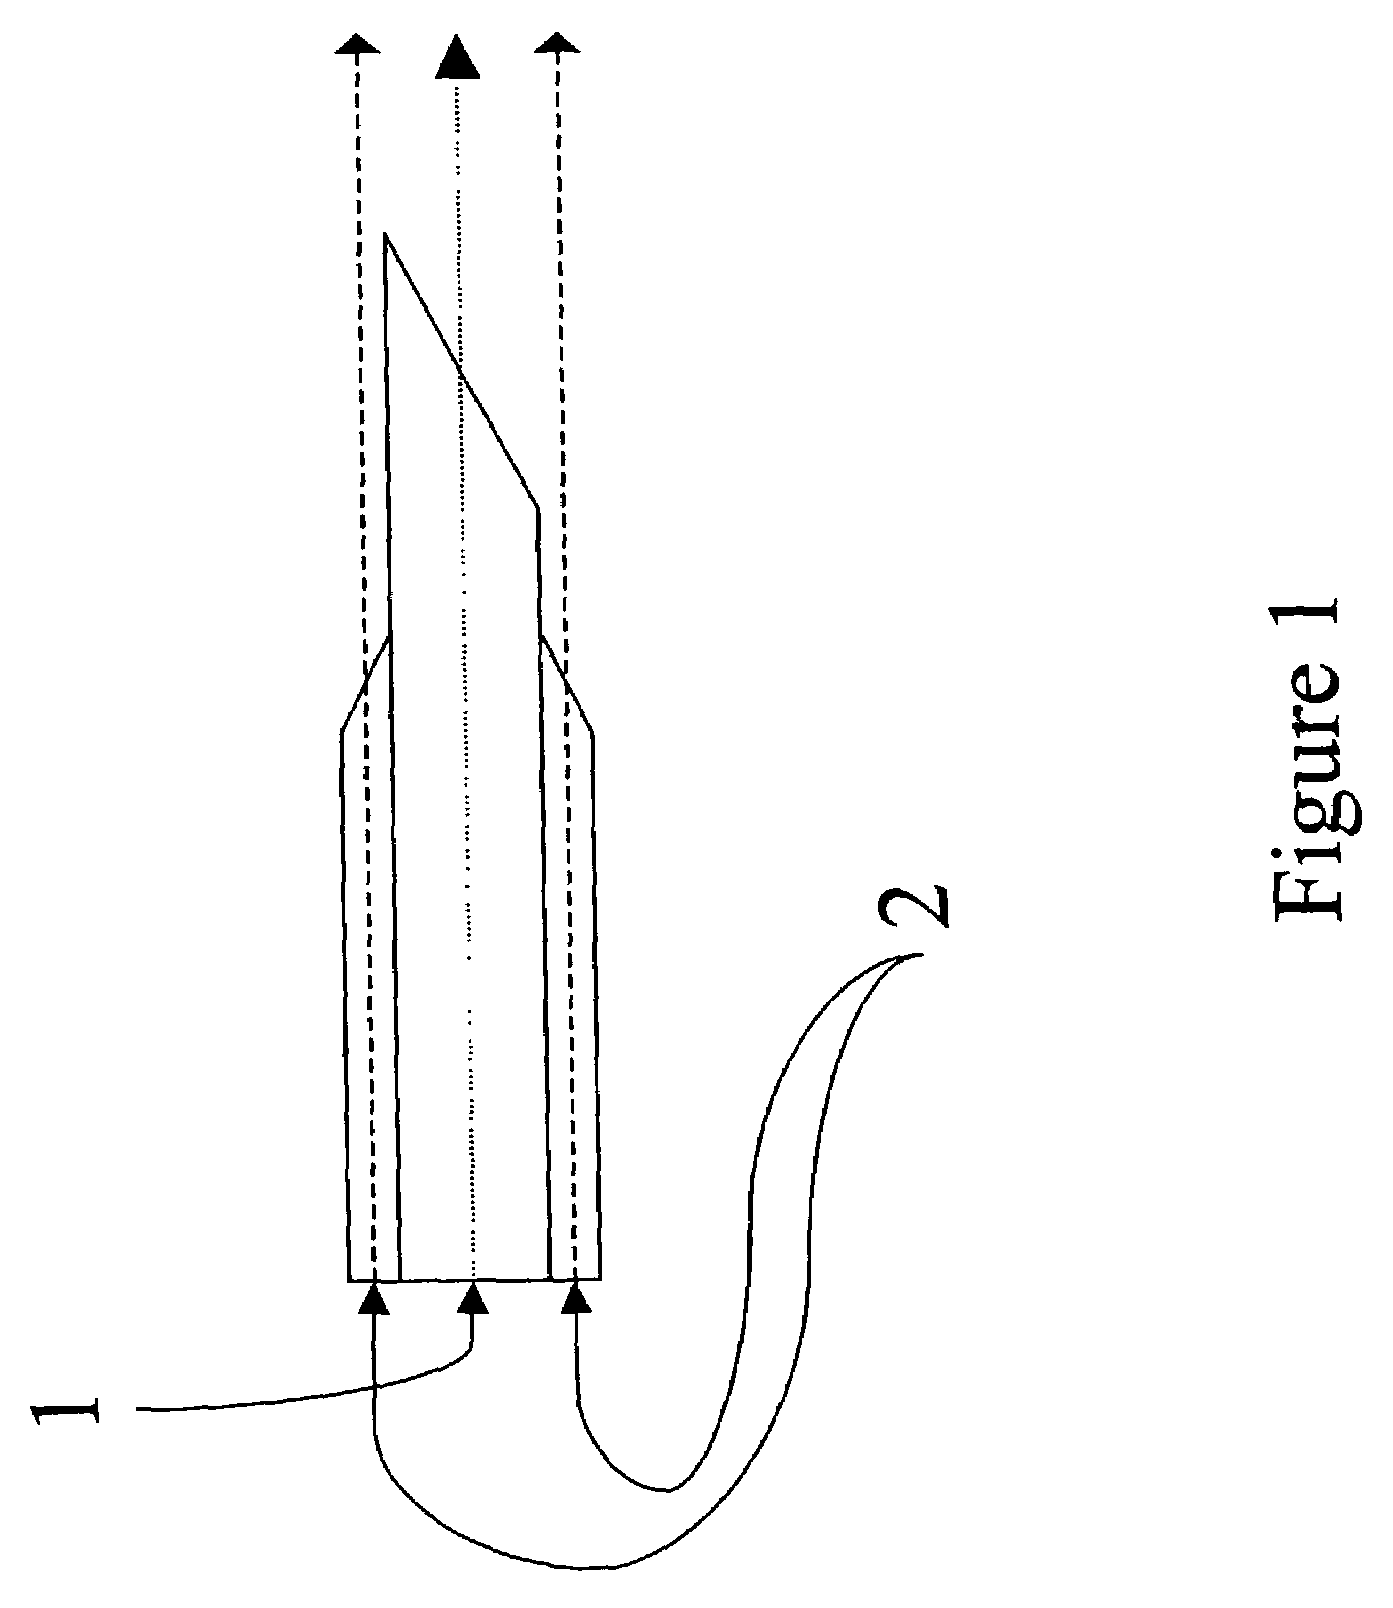 Injection devices that provide reduced outflow of therapeutic agents and methods of delivering therapeutic agents